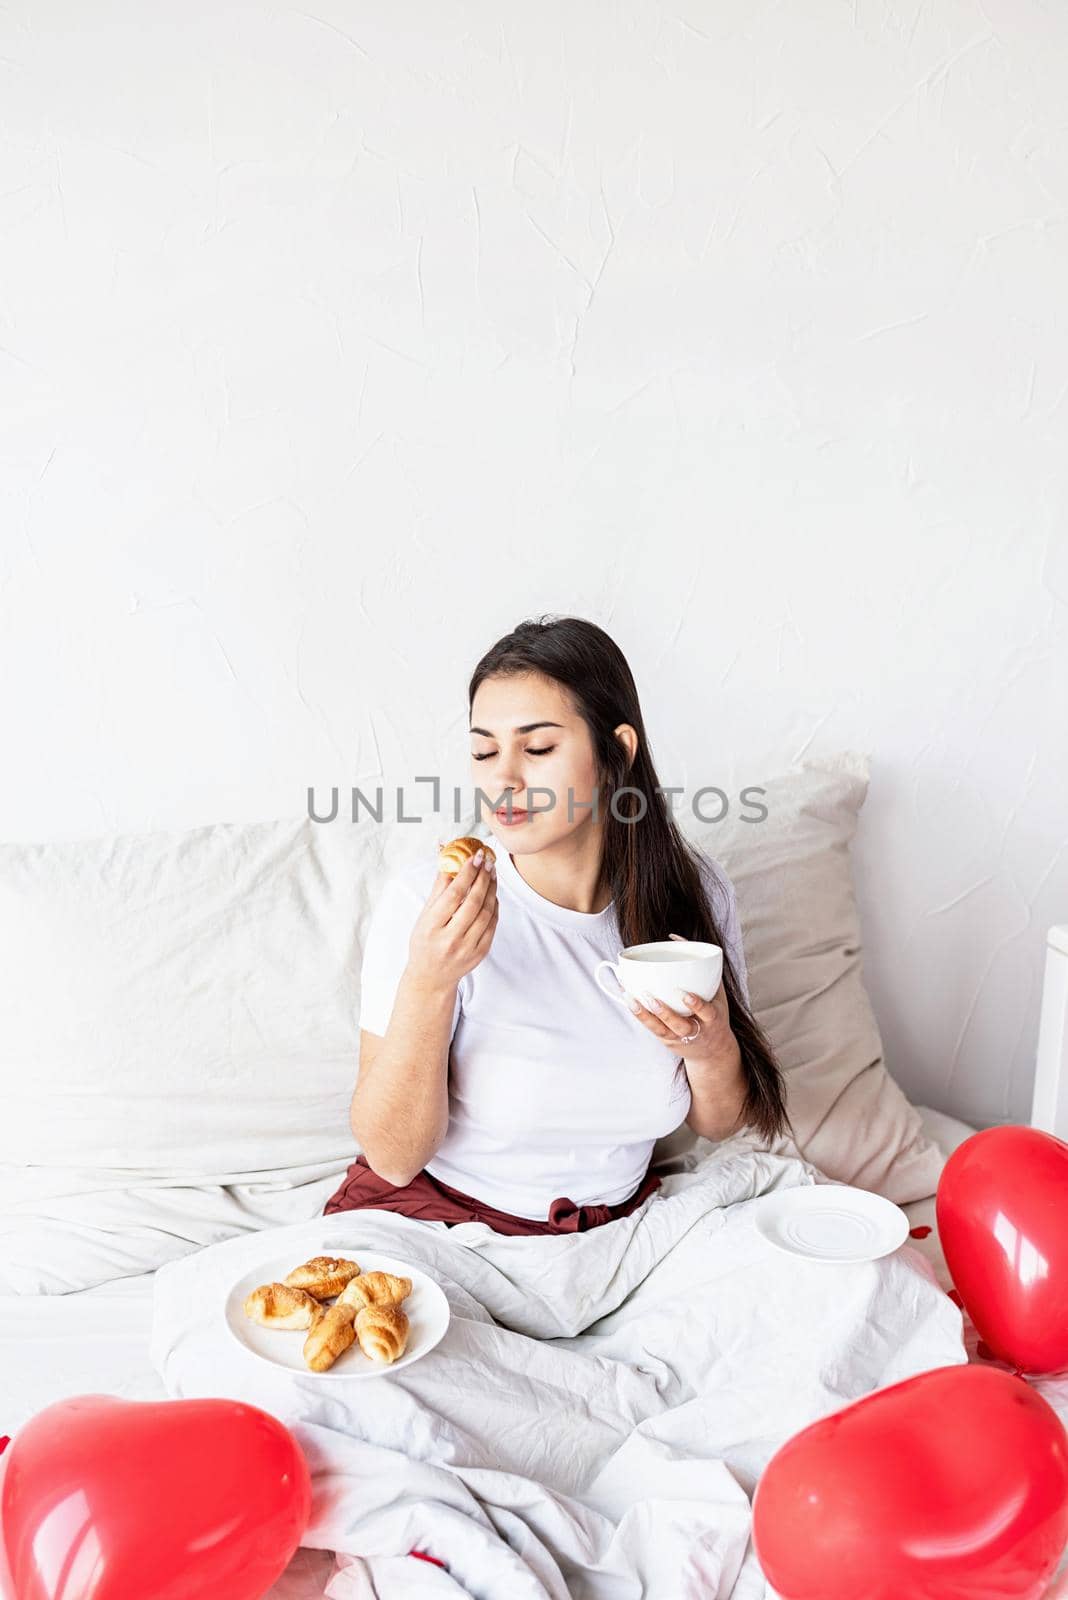 Young brunette woman sitting awake in the bed with red heart shaped balloons and decorations drinking coffee eating croissants by Desperada